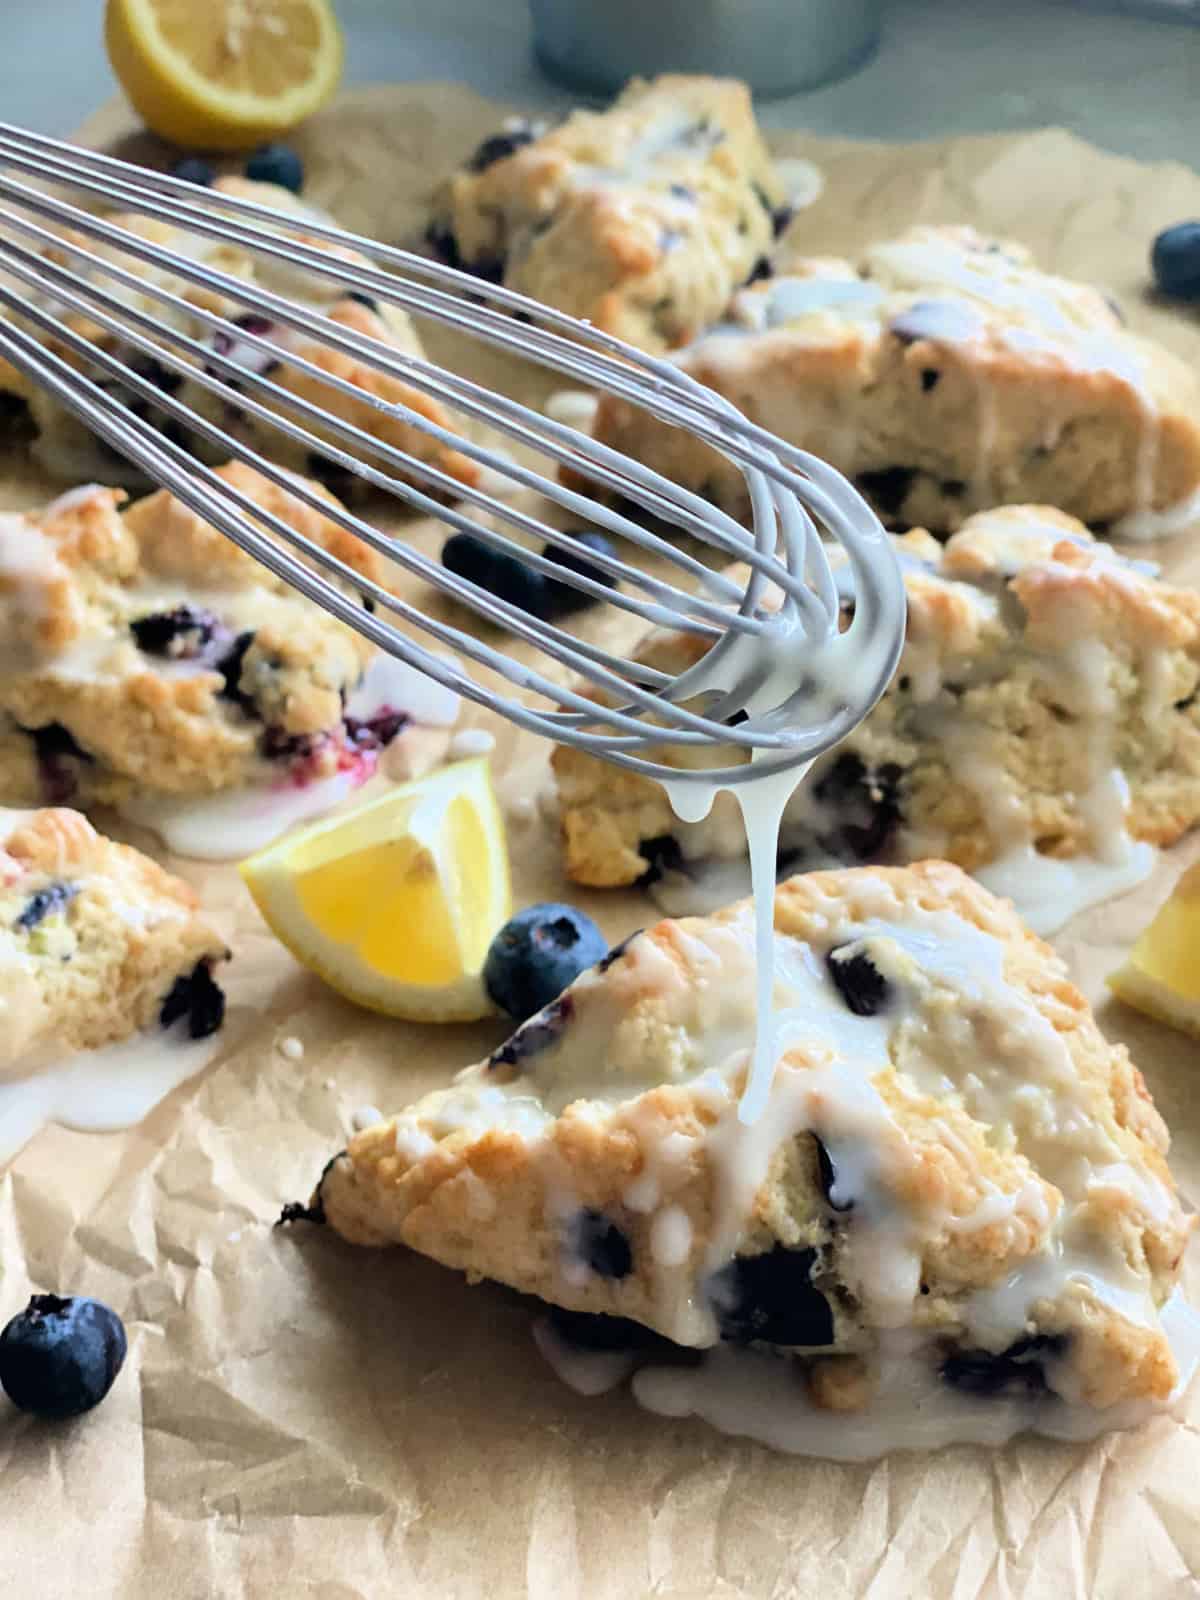 Whisk drizzling glaze on top of blueberry scones.